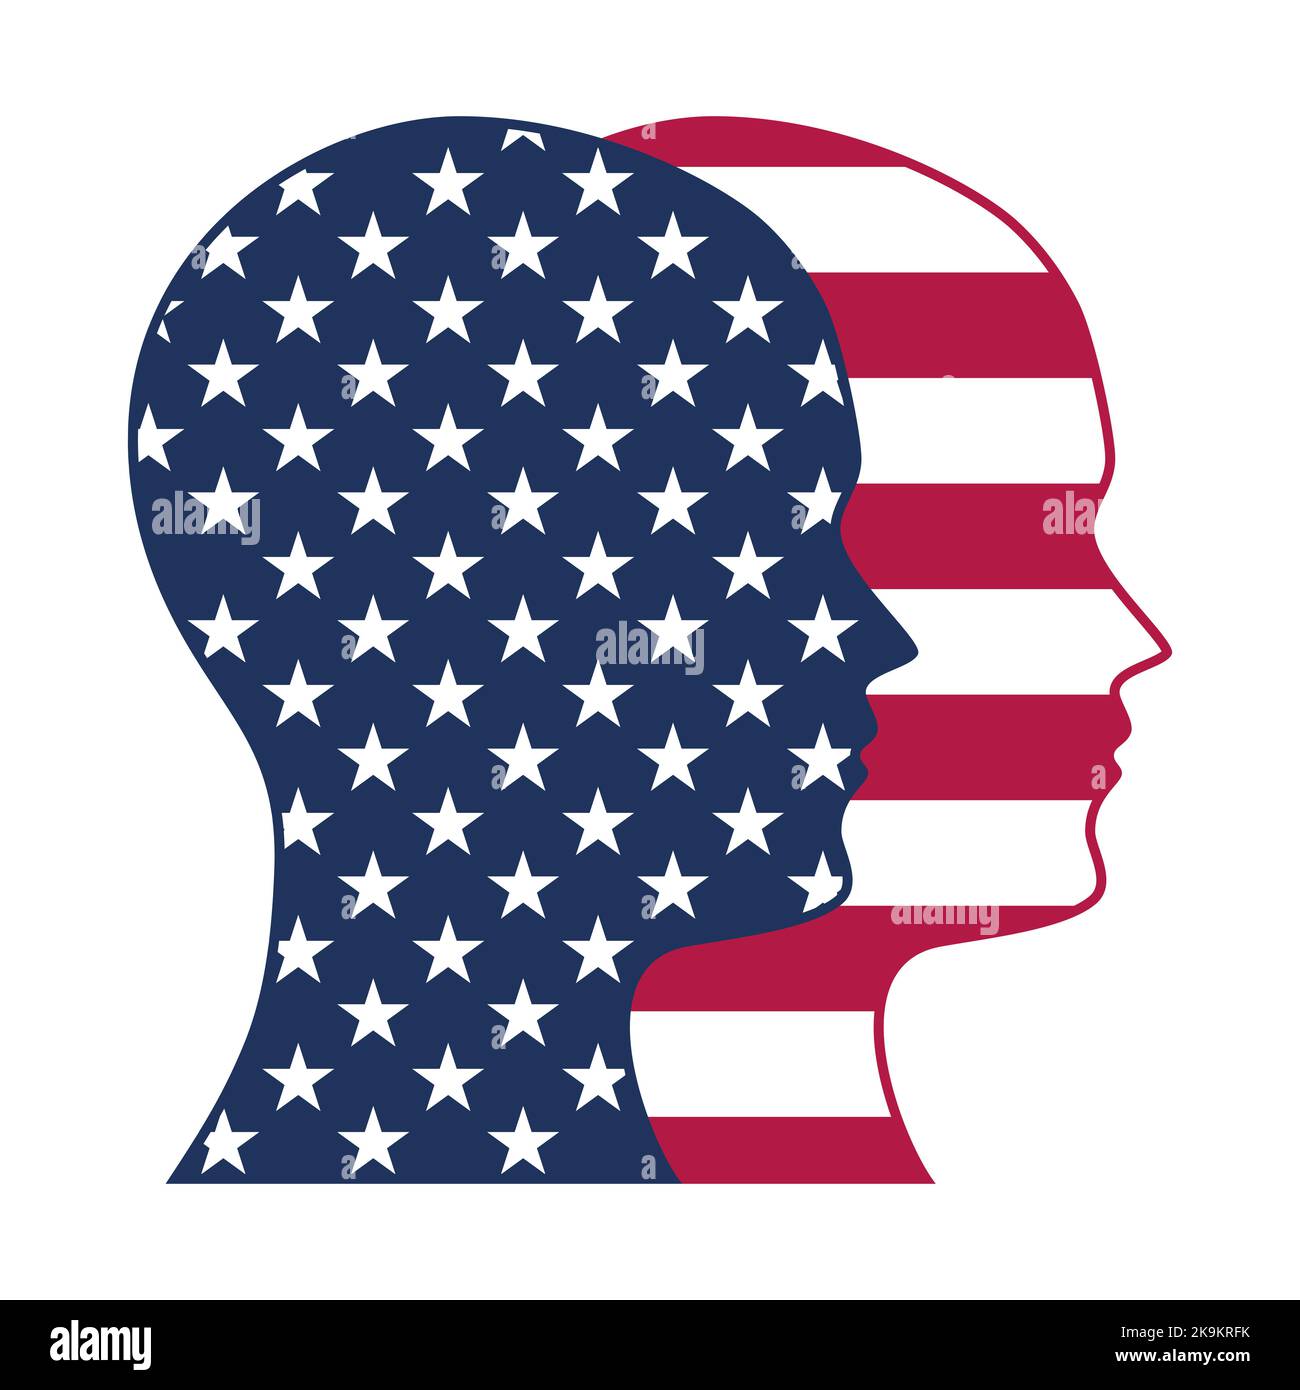 Heads with the American flag motif, looking in the same direction. Symbol of peace and unity between 2 opposing parties, overcoming their opposites. Stock Photo